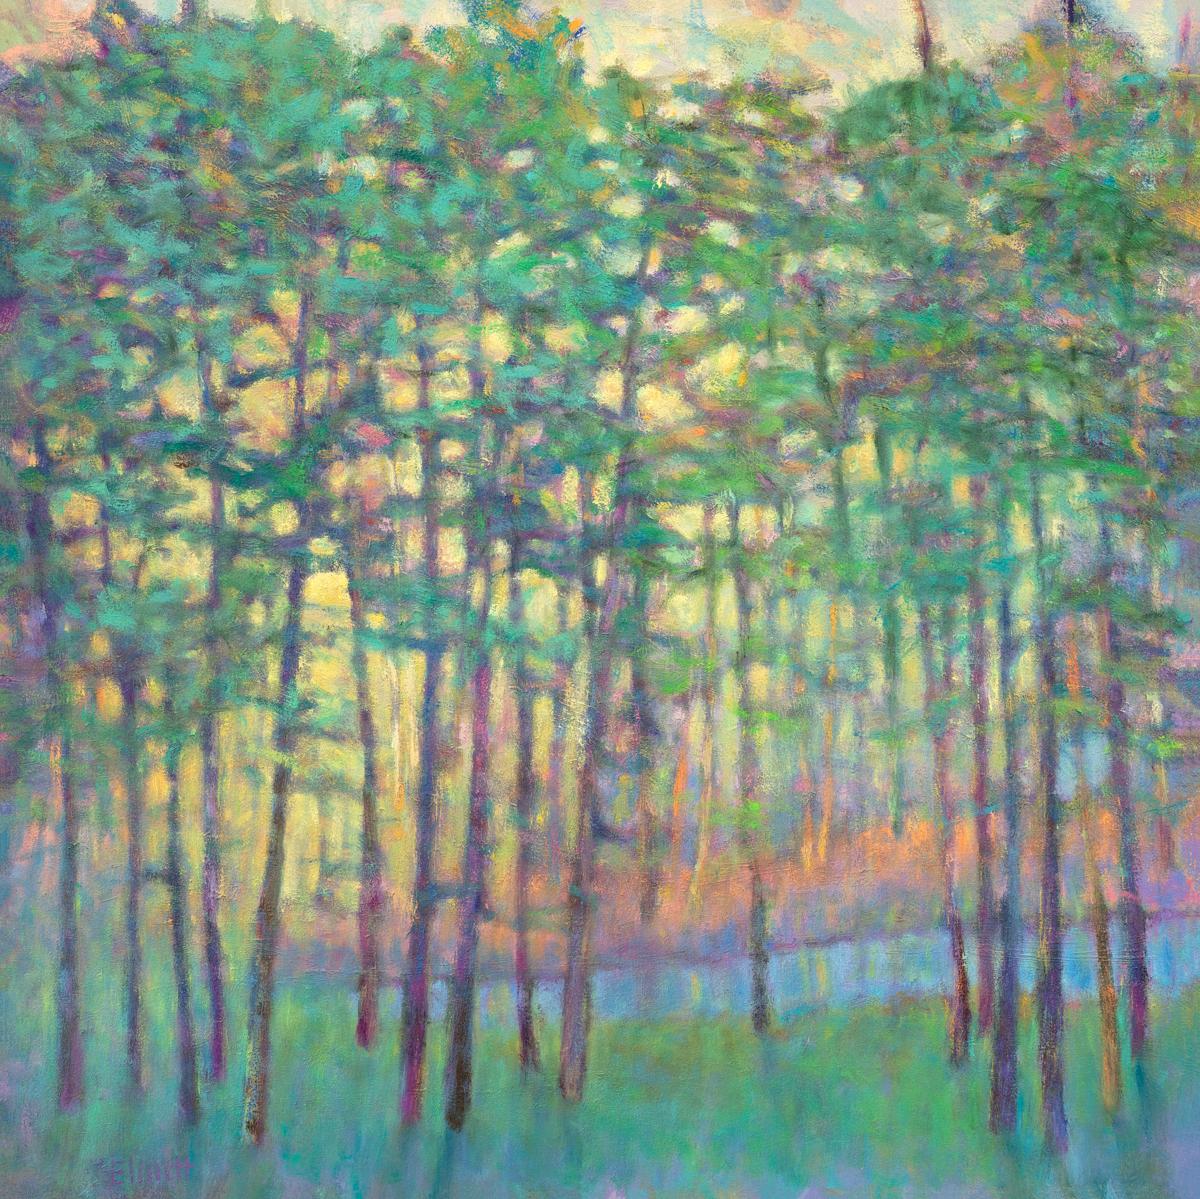 This abstract landscape limited edition print by Ken Elliott features a bright palette and an impressionistic style. The forest scene is rendered with a vibrant green connecting the foreground and the leaves of the trees, with warmer strokes of